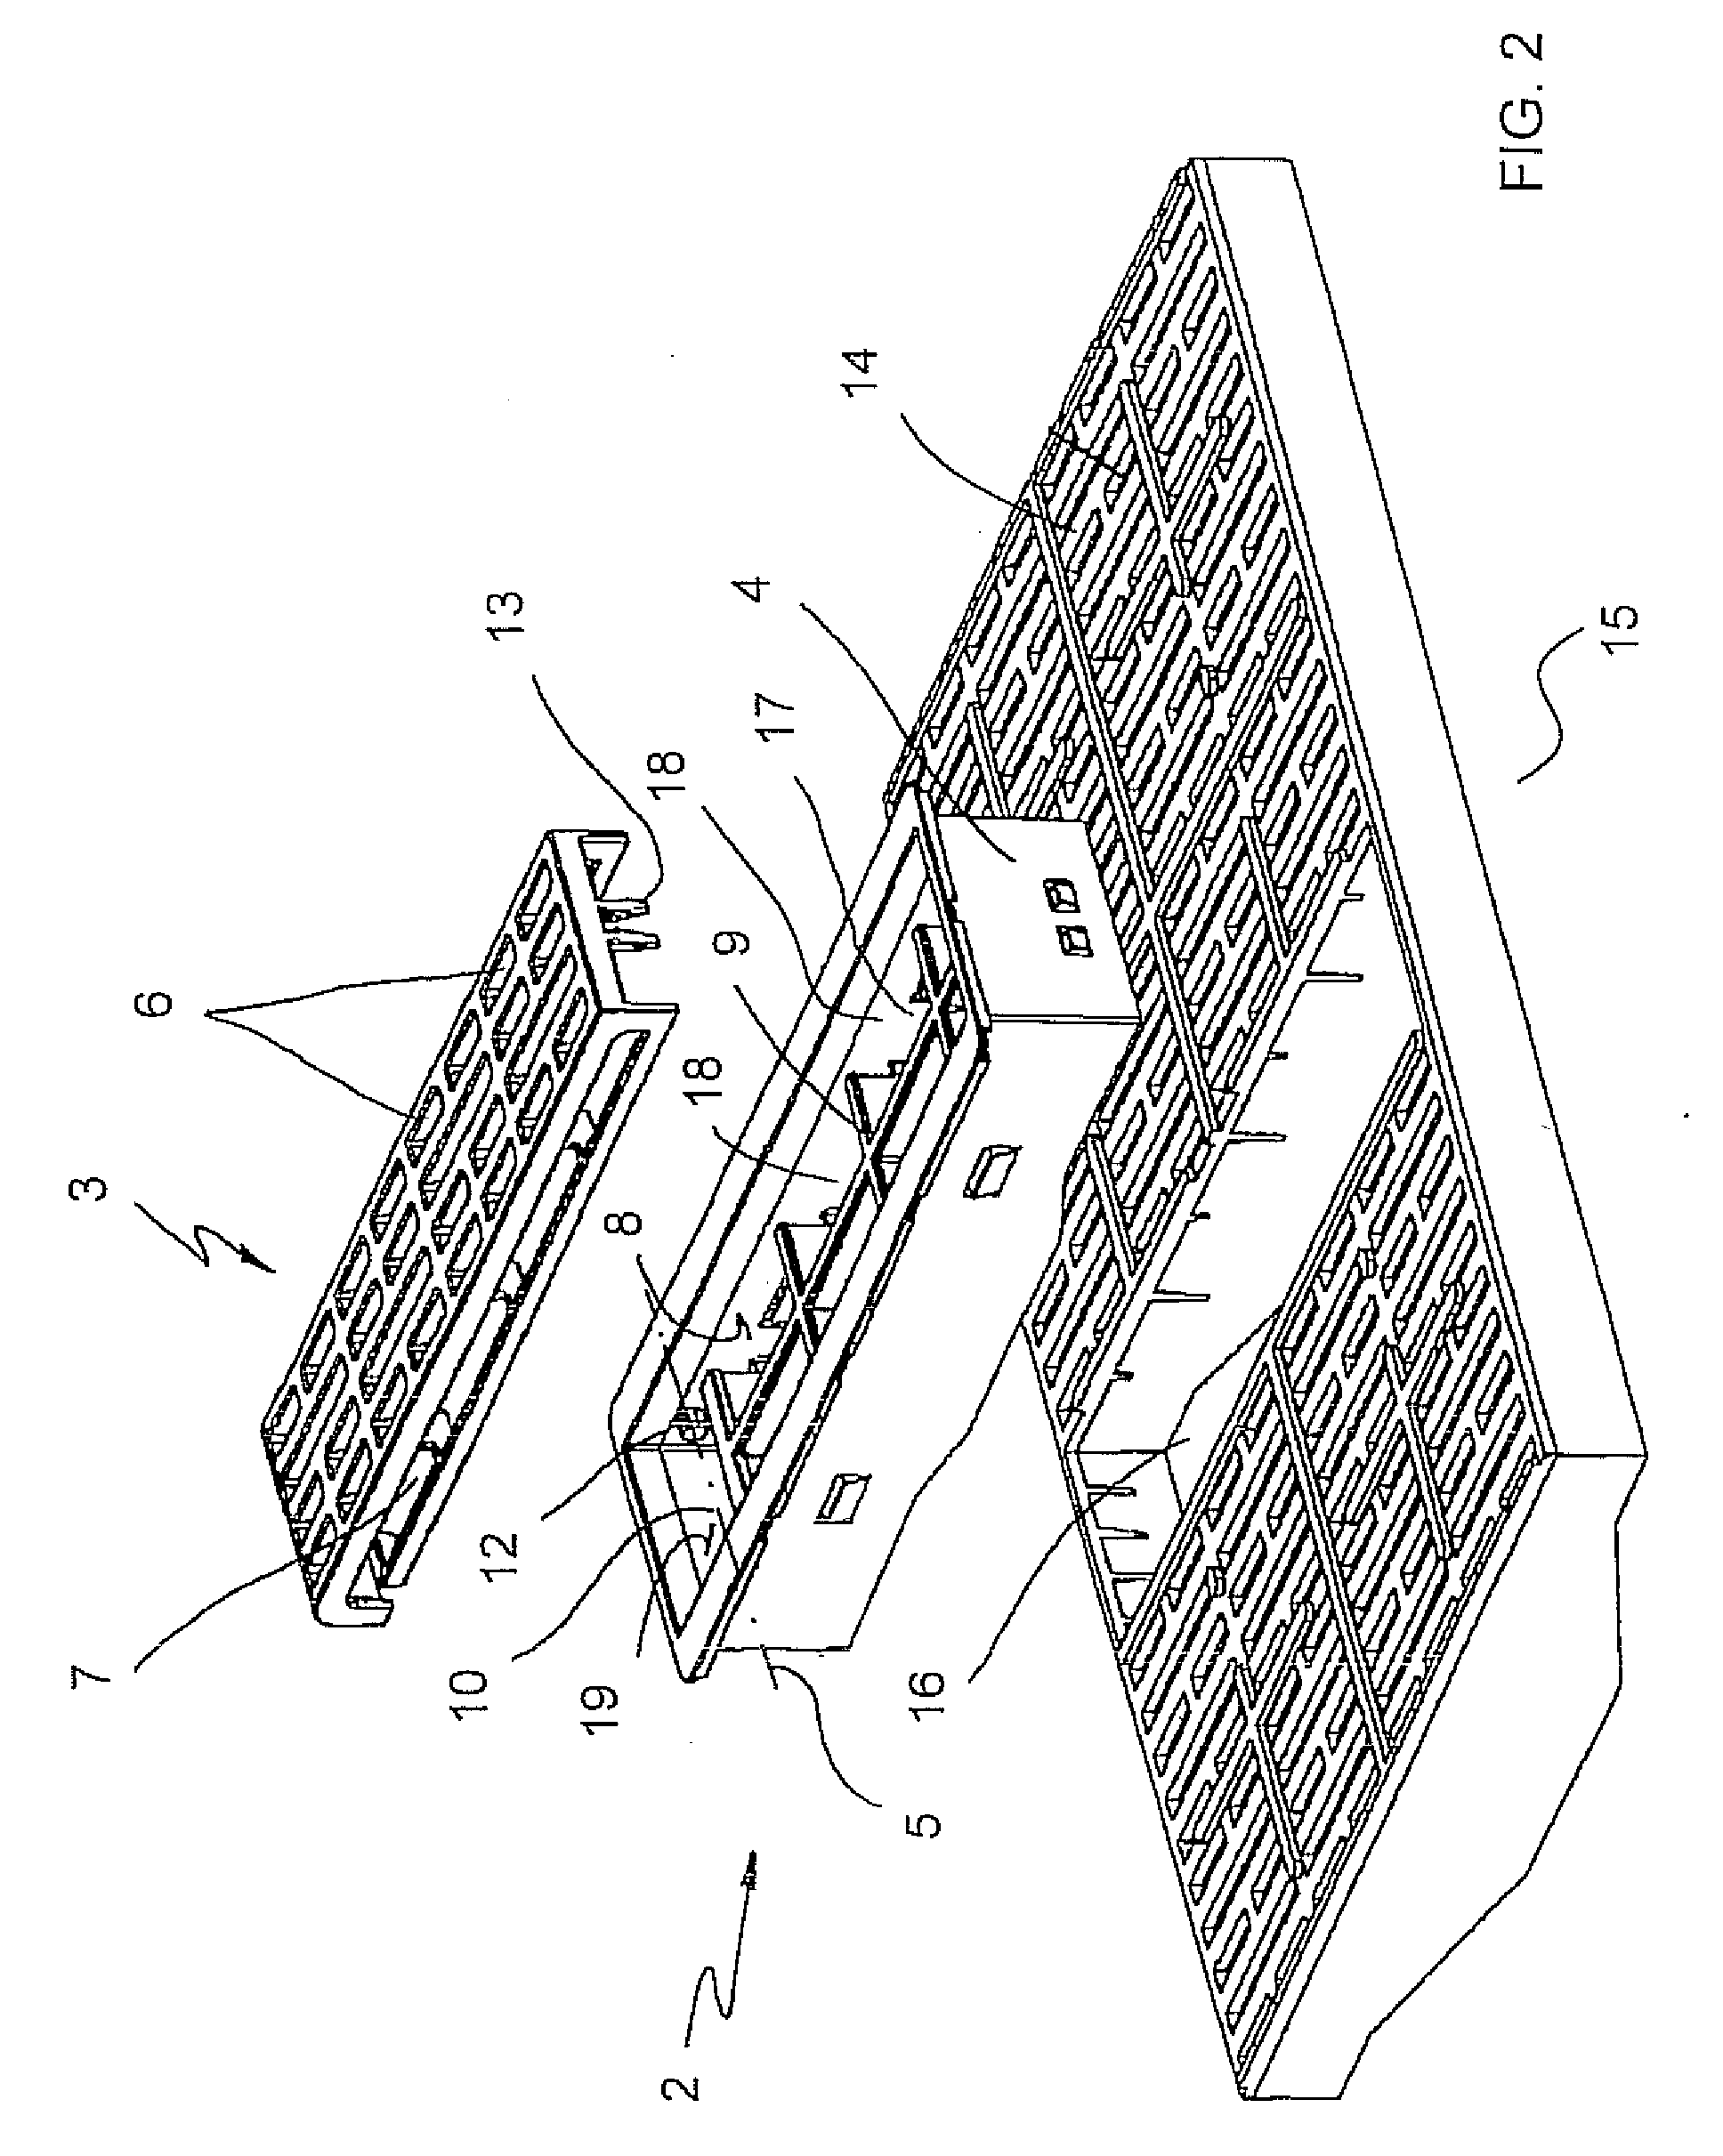 Slatted device for stable floors